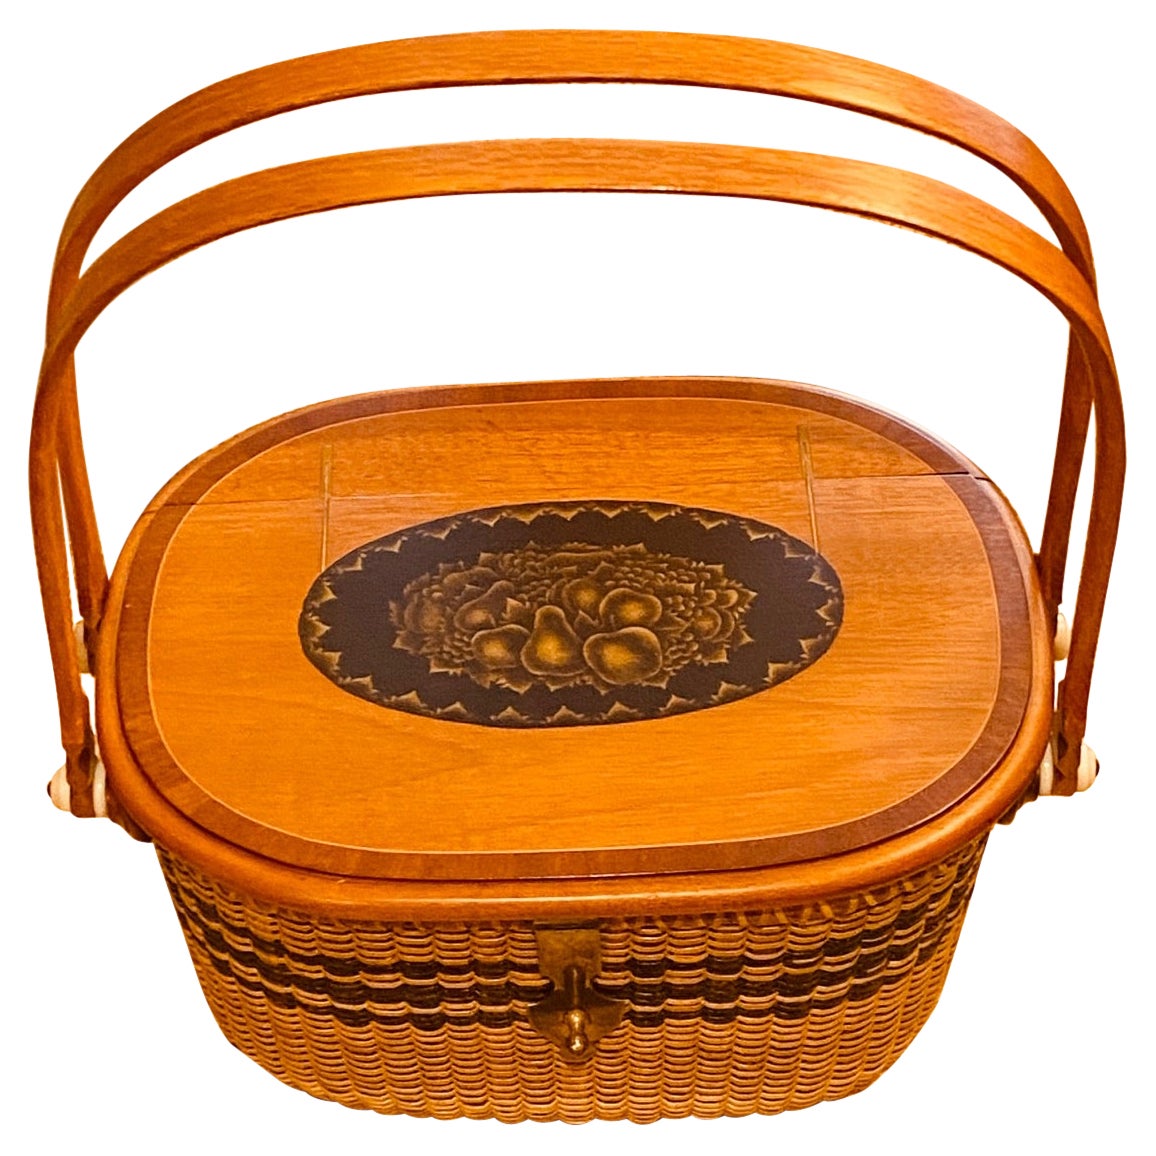 Nantucket Basket with Stencil Decorated Top, by Harry Hilbert, 1995 For Sale